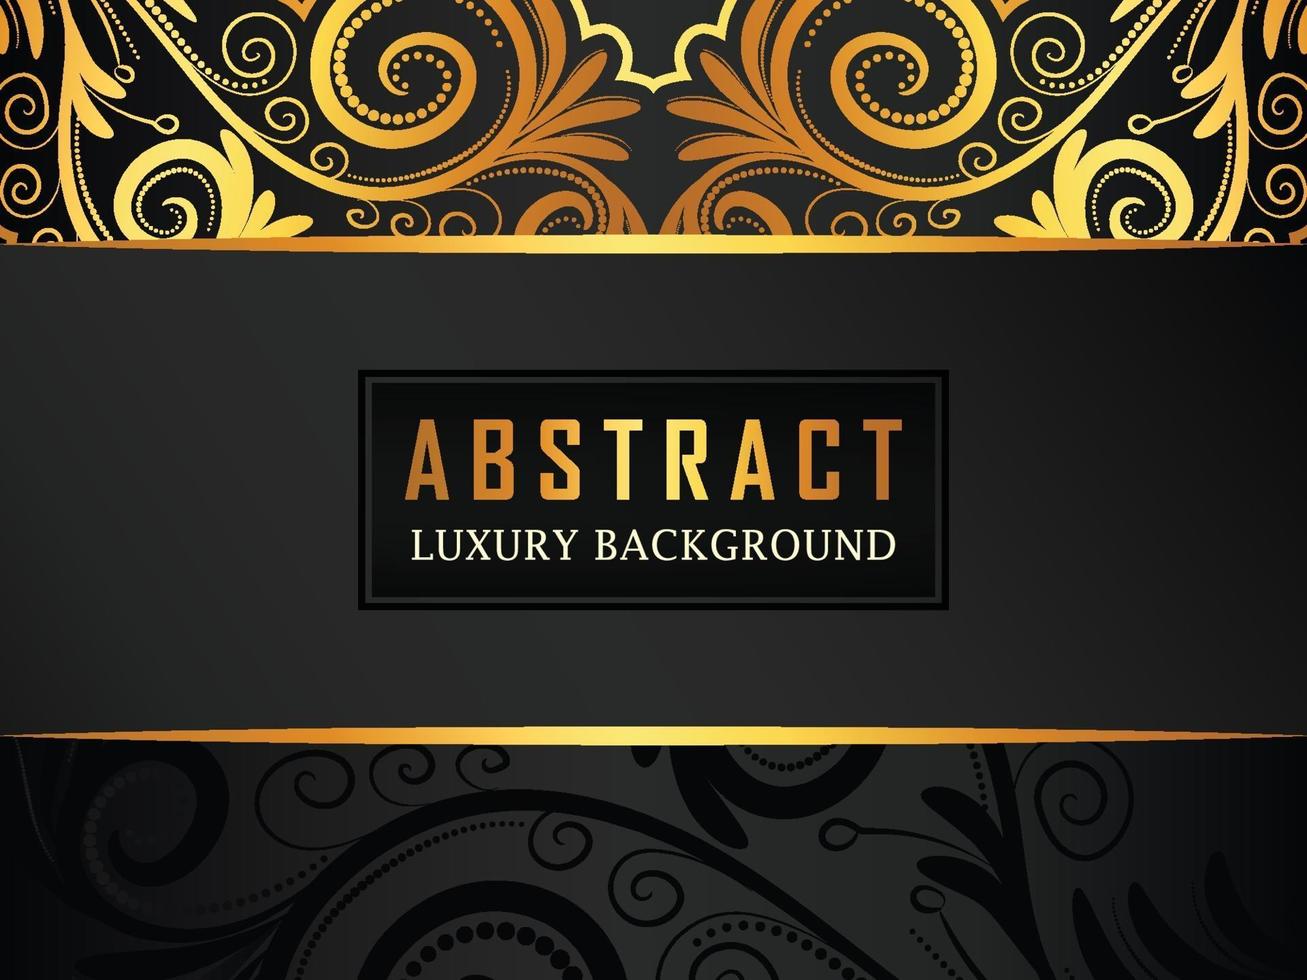 Abstract Luxury Ornamental background vector